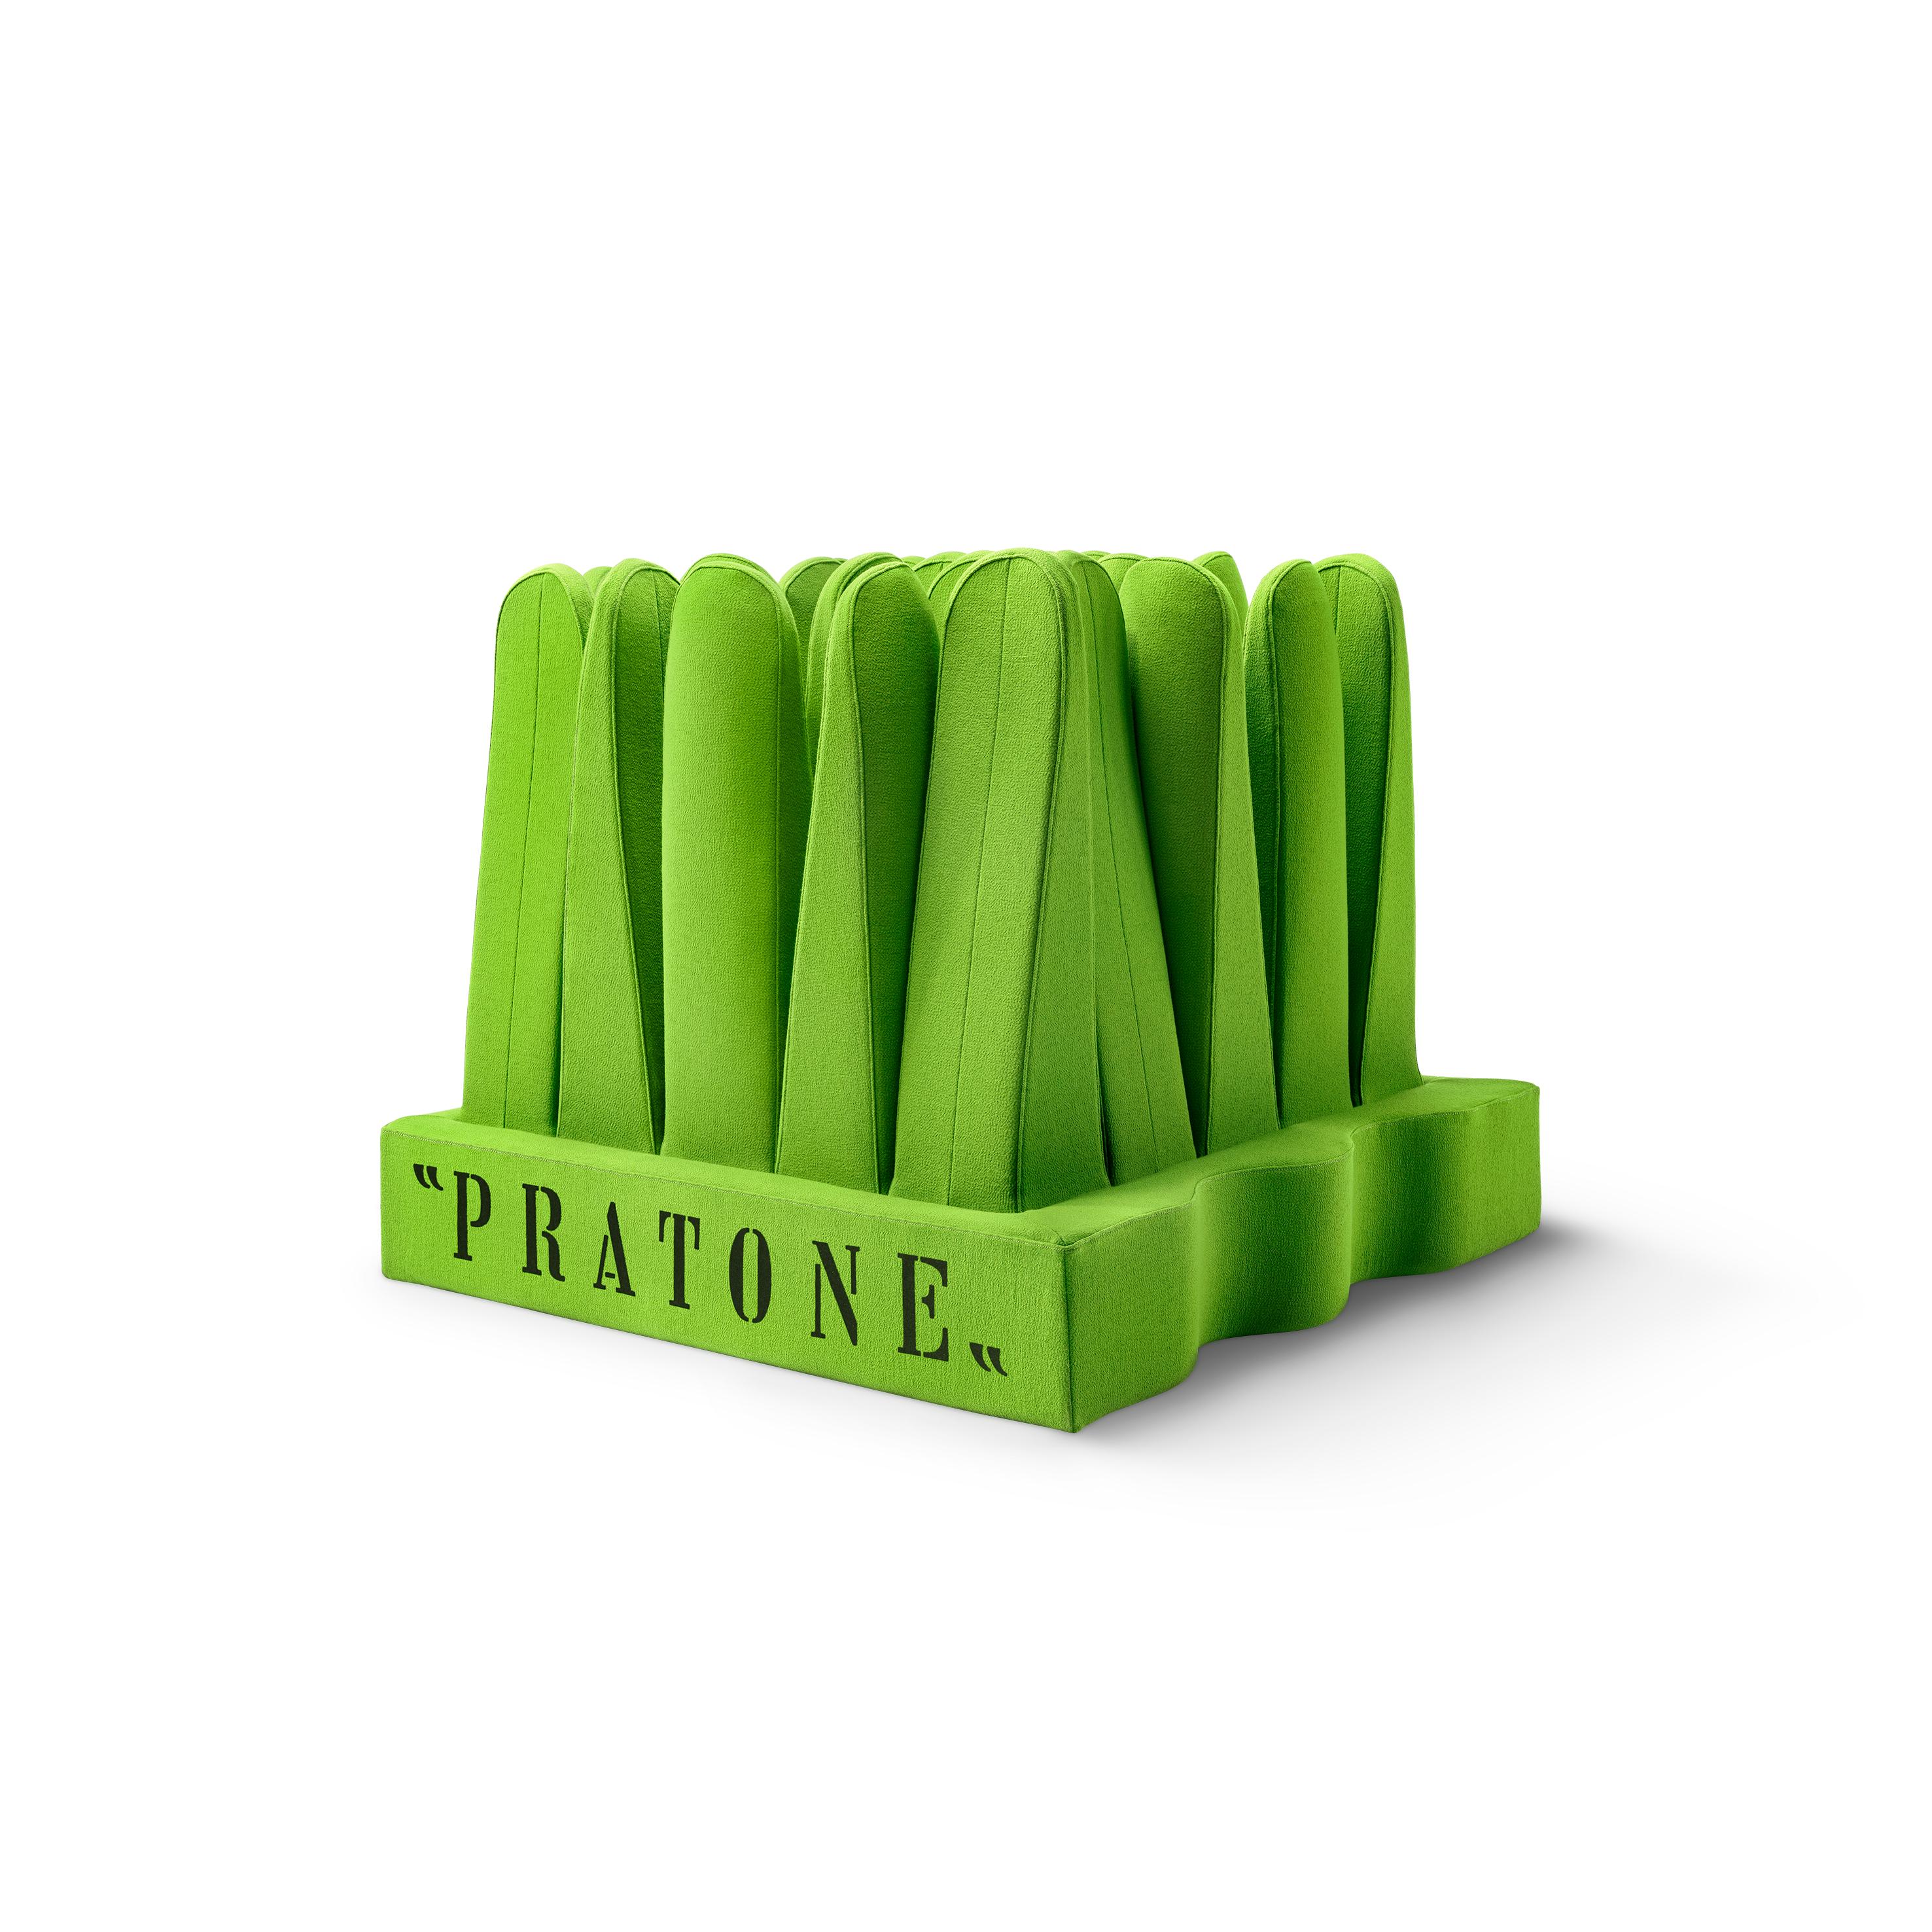 PRATONE® FOREVER is the version which was born to celebrate the 50th anniversary of the timeless icon PRATONE®, a myth which reinvents itself and becomes eternal, approaching the dimension of furnishing more and more. While maintaining its soft